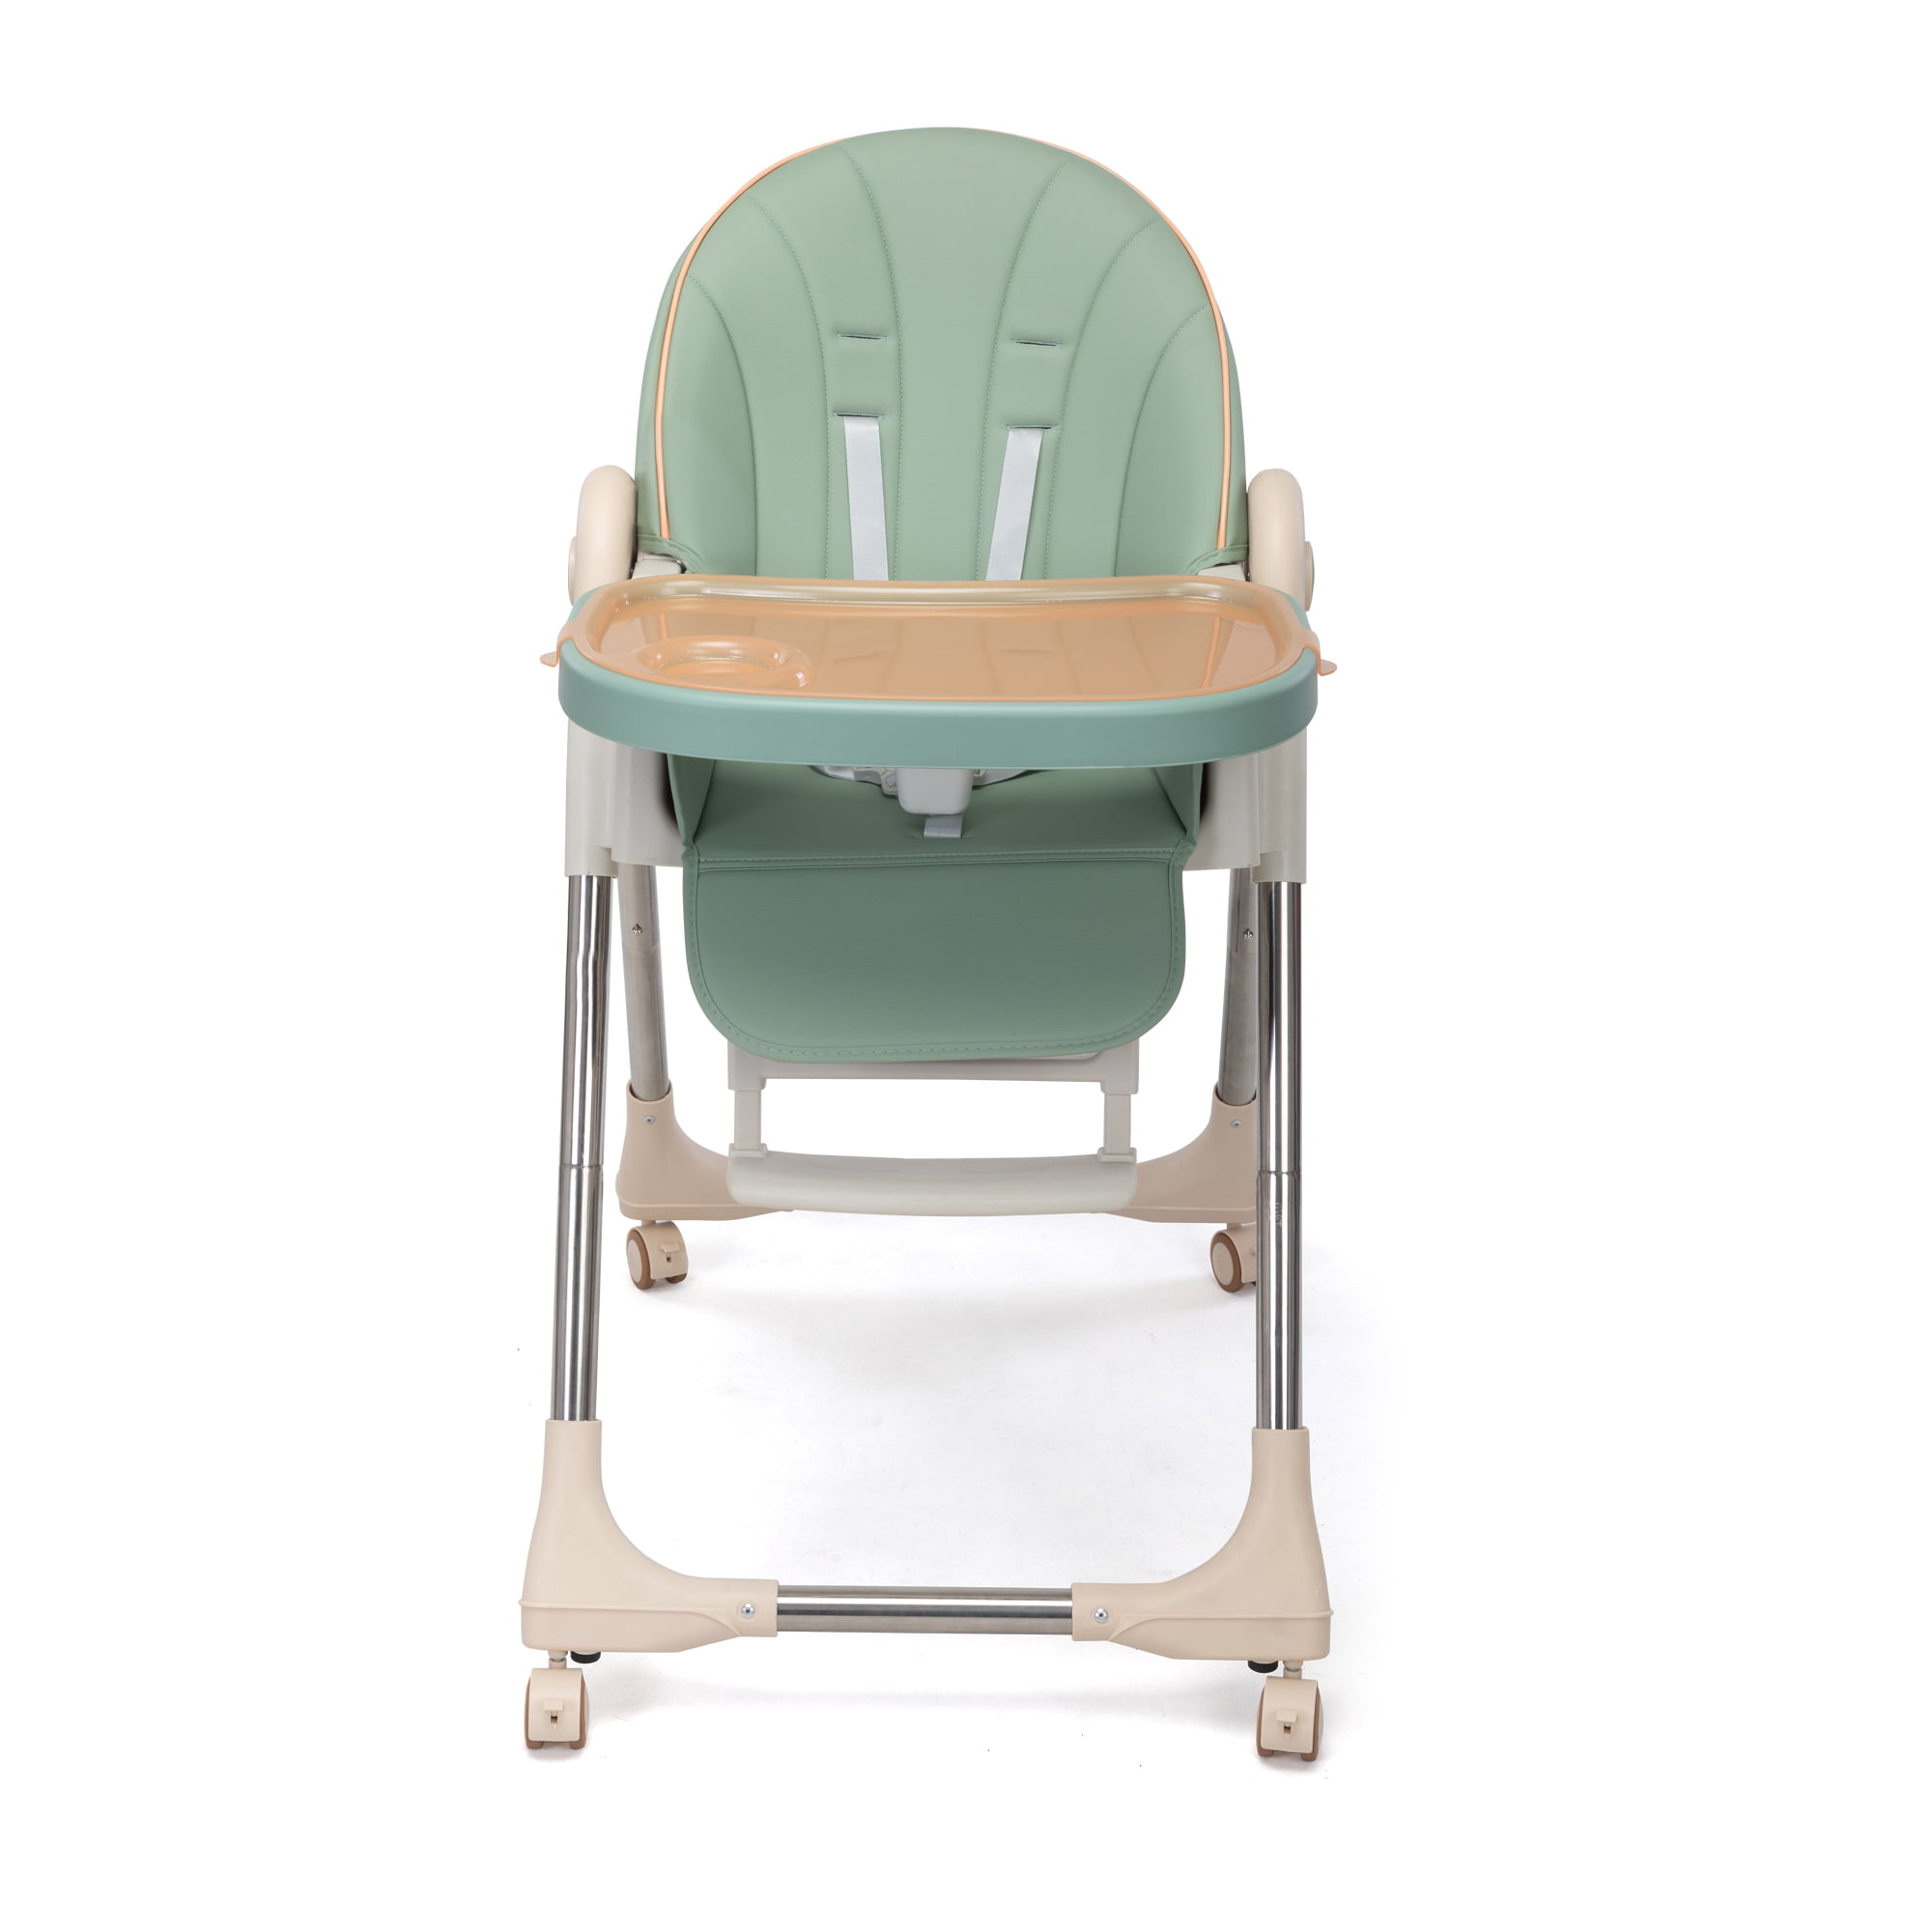 Booster Seat for Dining Table: Portable Toddler Booster Chair with Safety  Buckle and Height Adjustable, Foldable Baby Feeding Chair, Kids High Chair